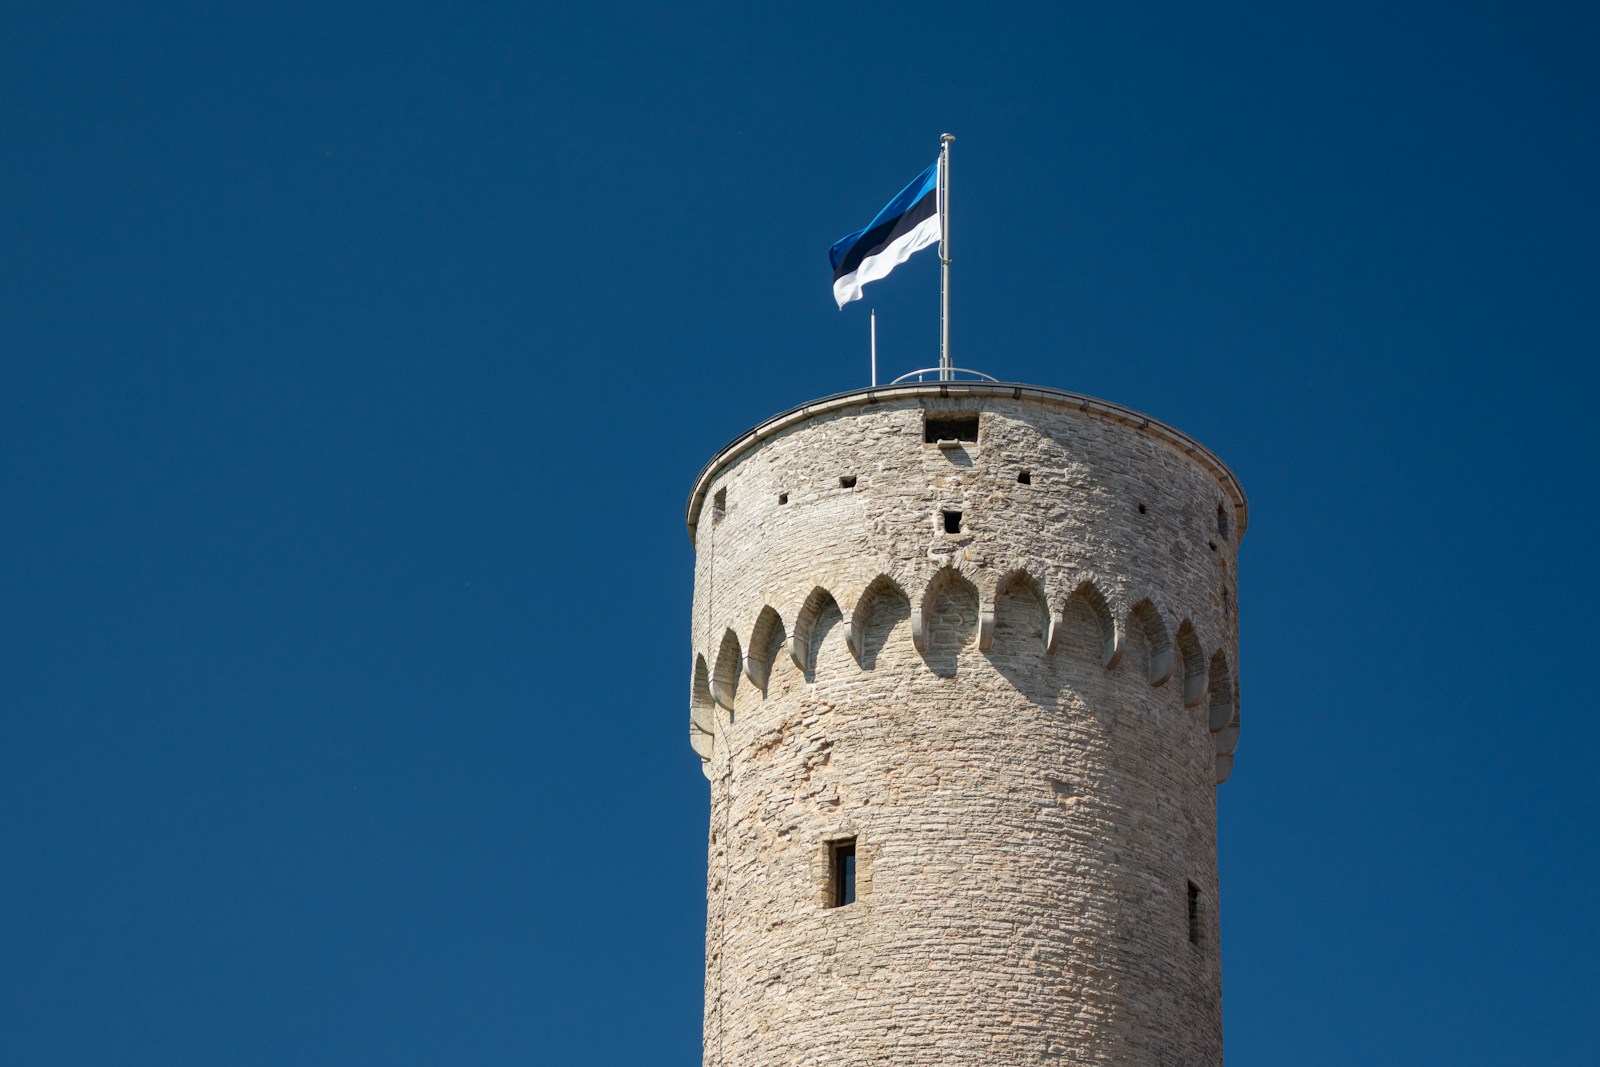 brown concrete tower with blue, black, and white flag on top